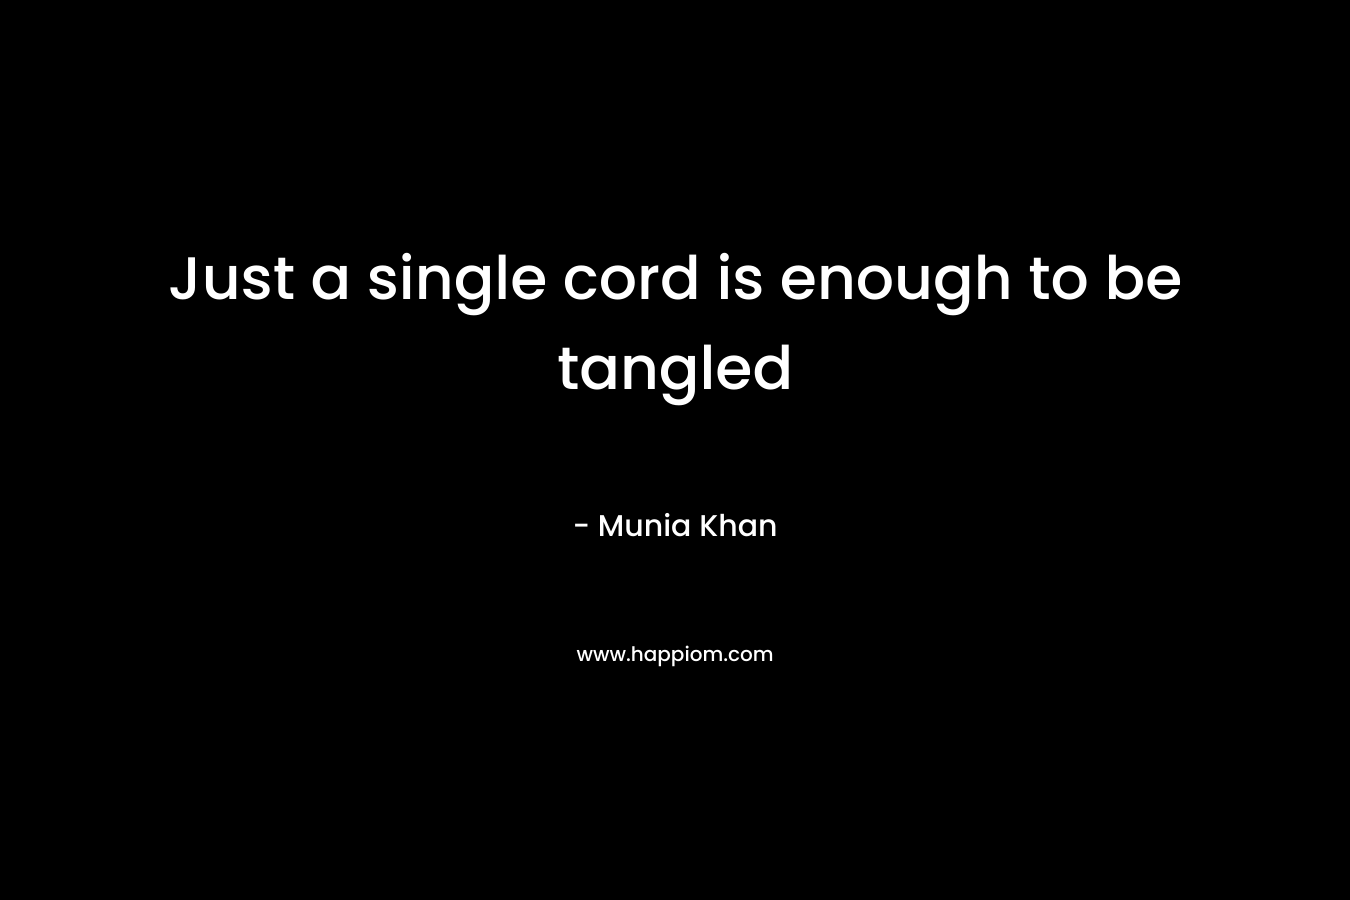 Just a single cord is enough to be tangled